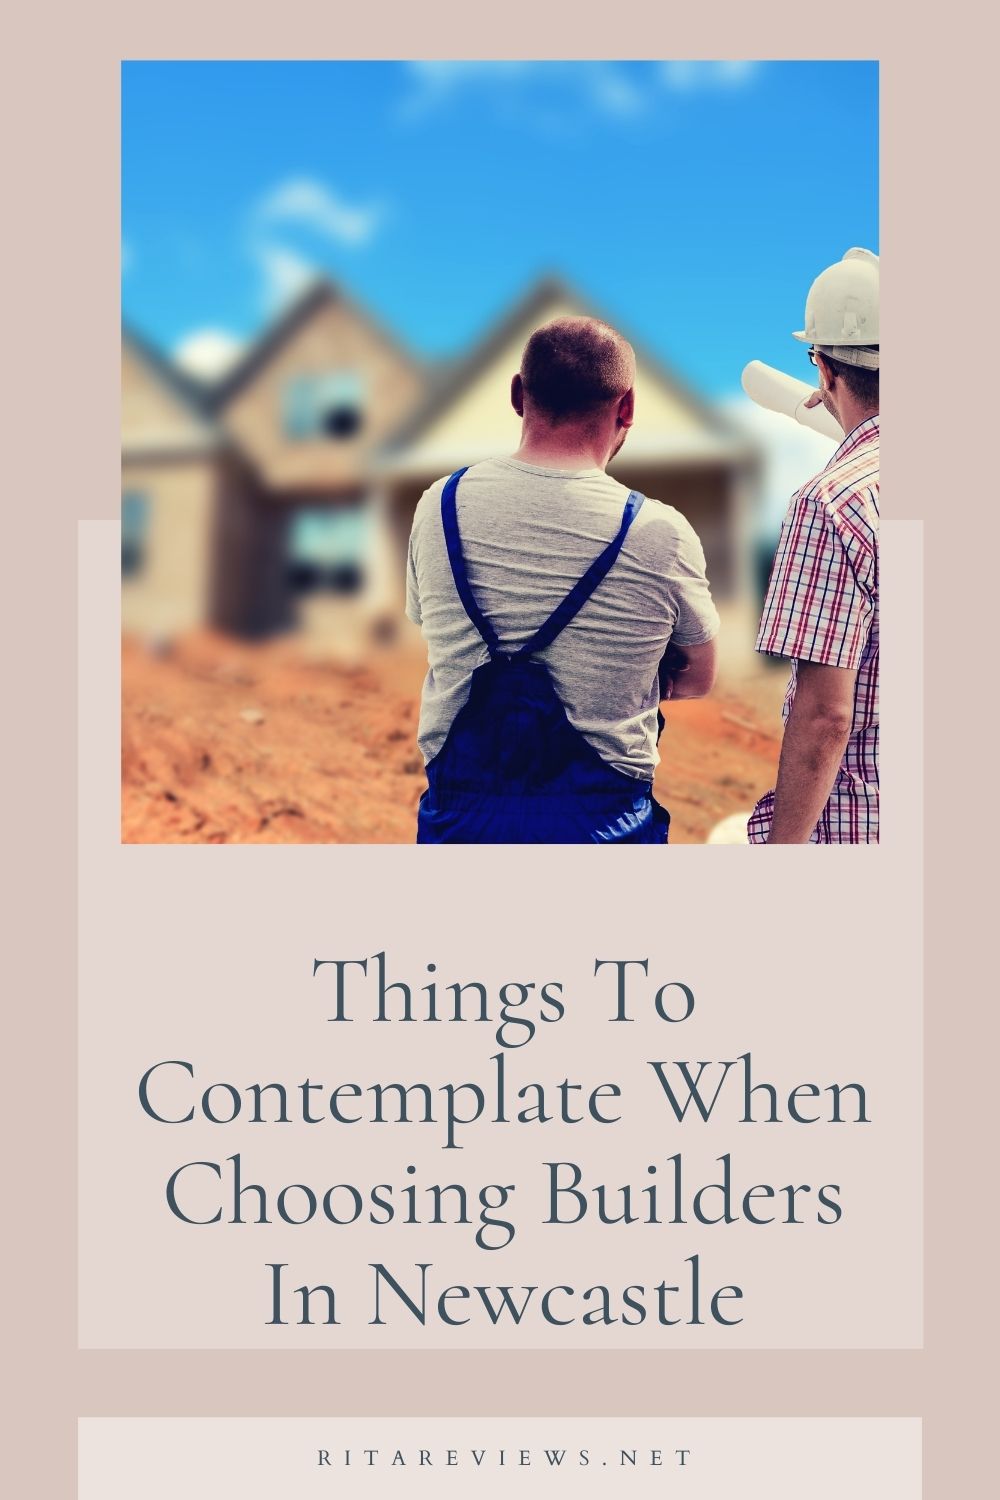 Things To Contemplate When Choosing Builders In Newcastle